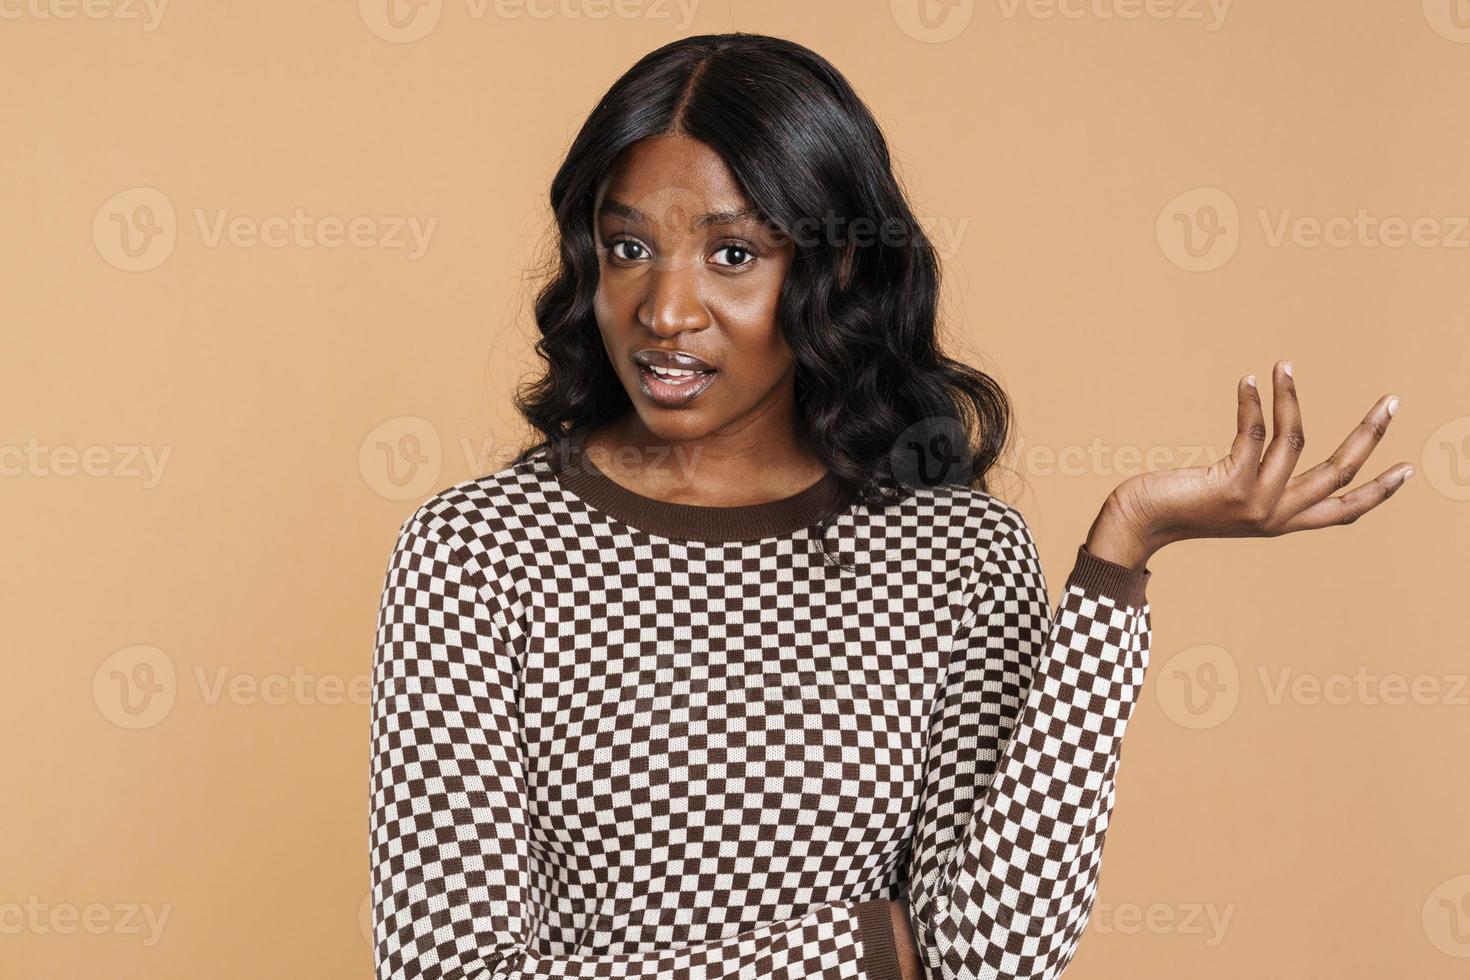 Negatively surprised African woman looking at the camera with hand up photo